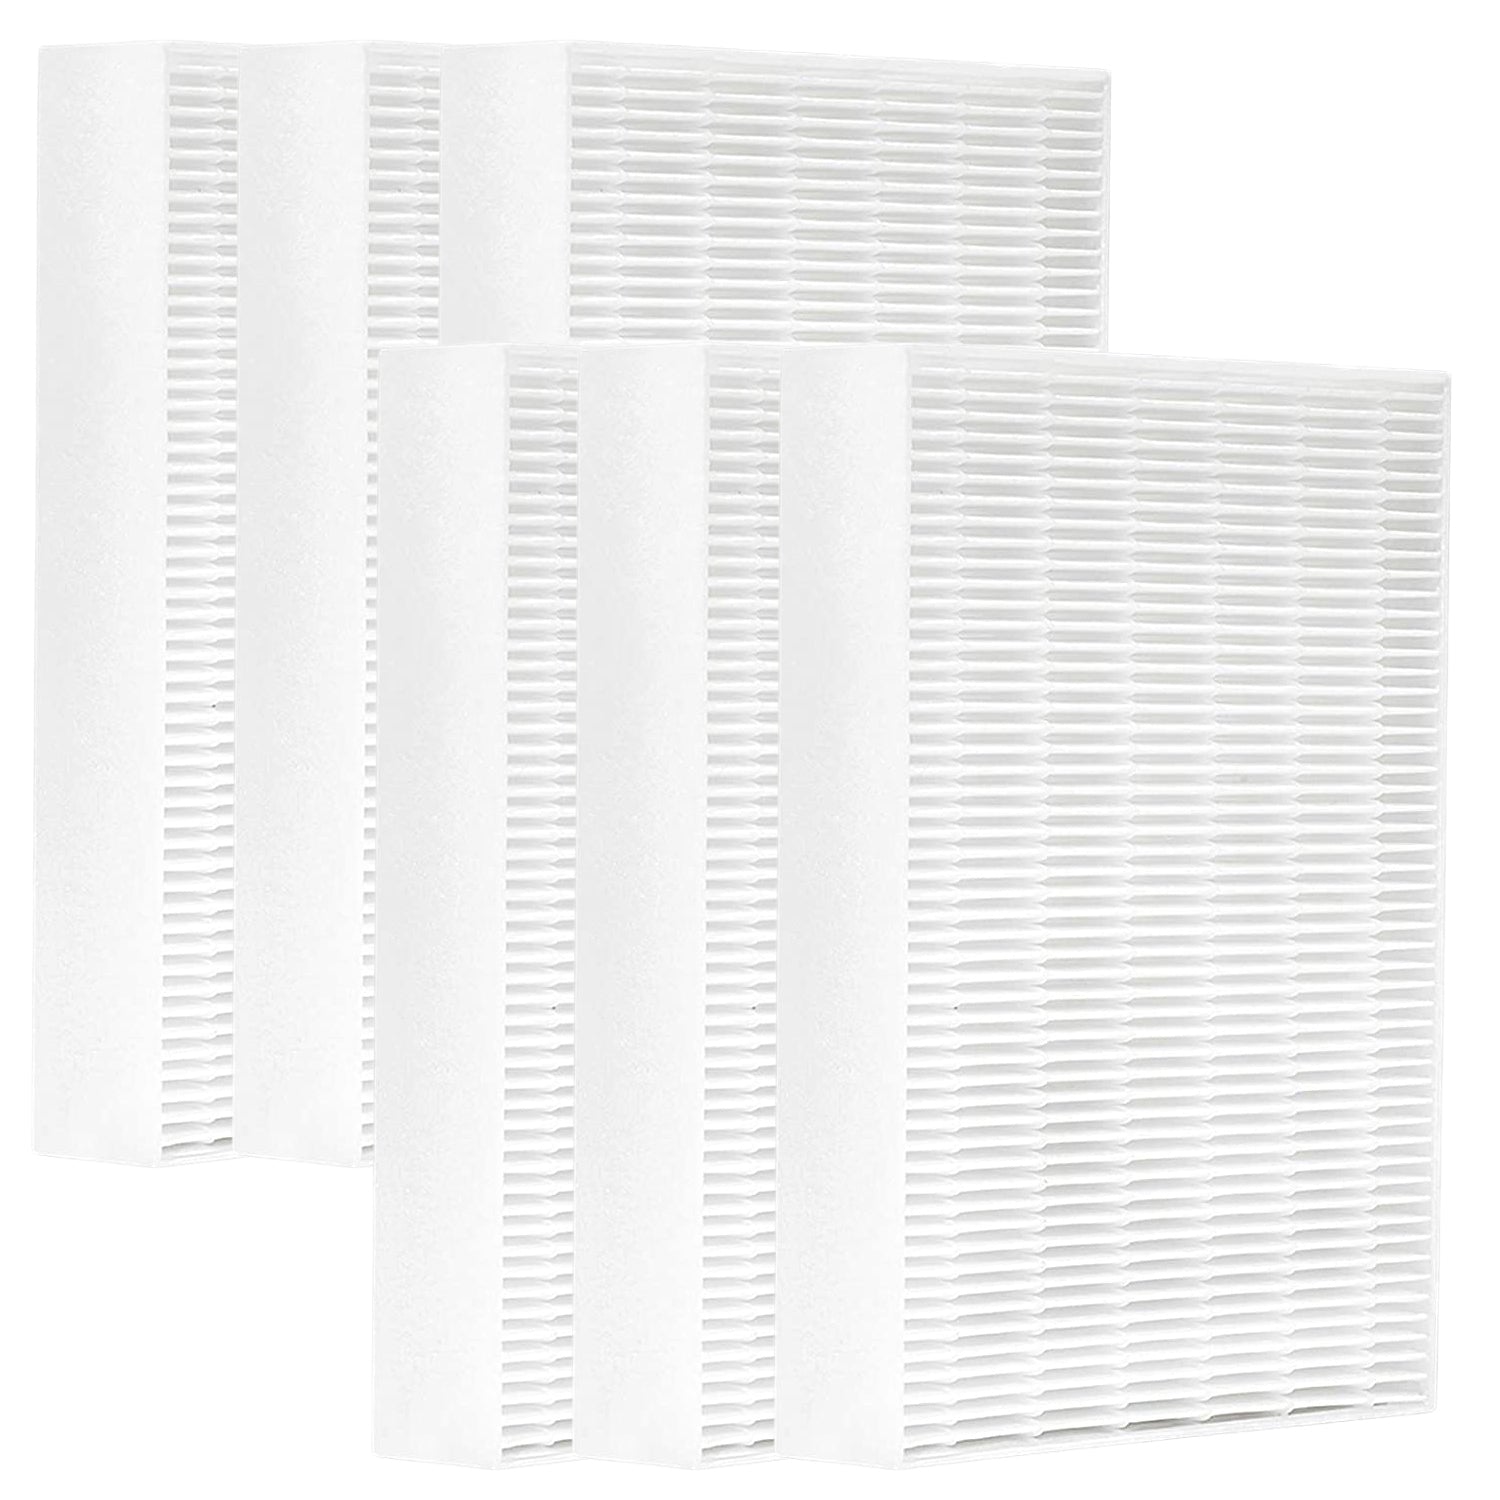 MaximalPower HPA300 HON R True HEPA Replacement Filter R - Compatible with Honeywell HPA100 HPA200 HPA300